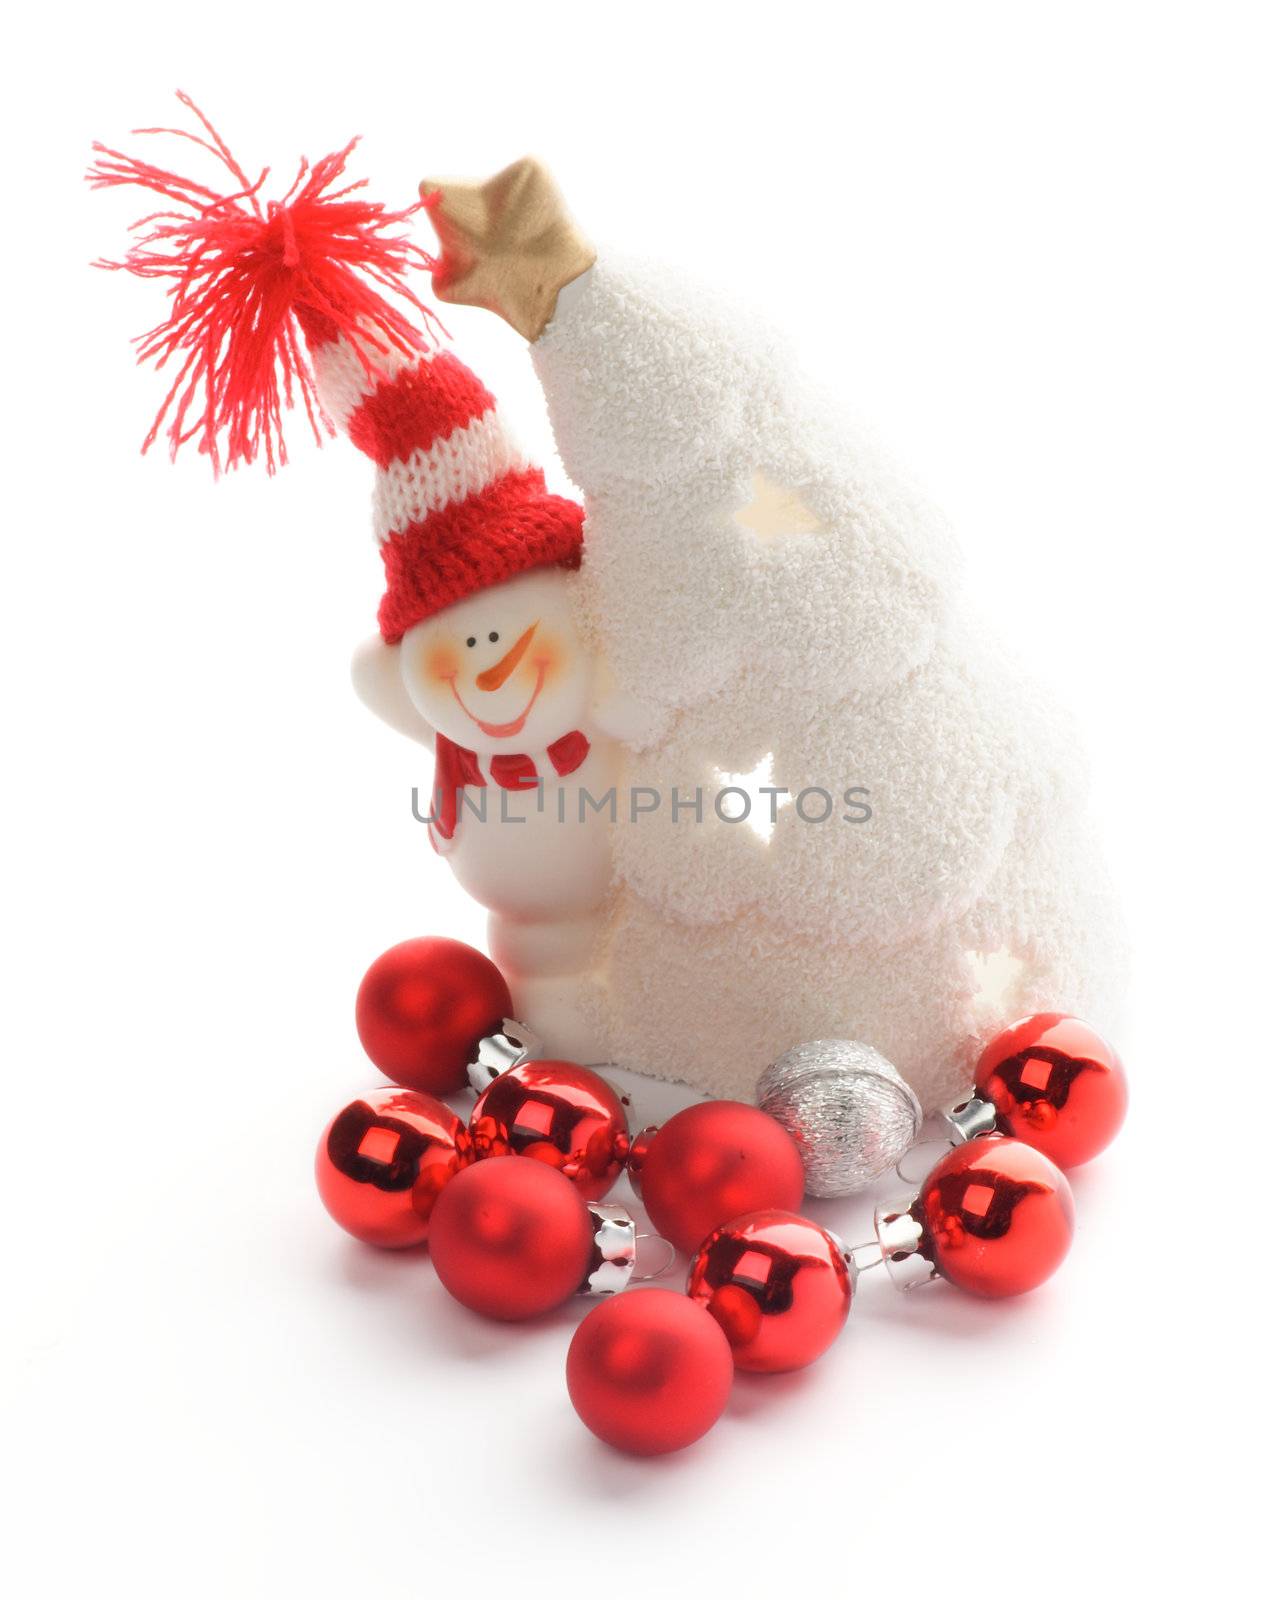 Snowman in Knitted Hat, Snow House and Red Little Baubles closeup on white background